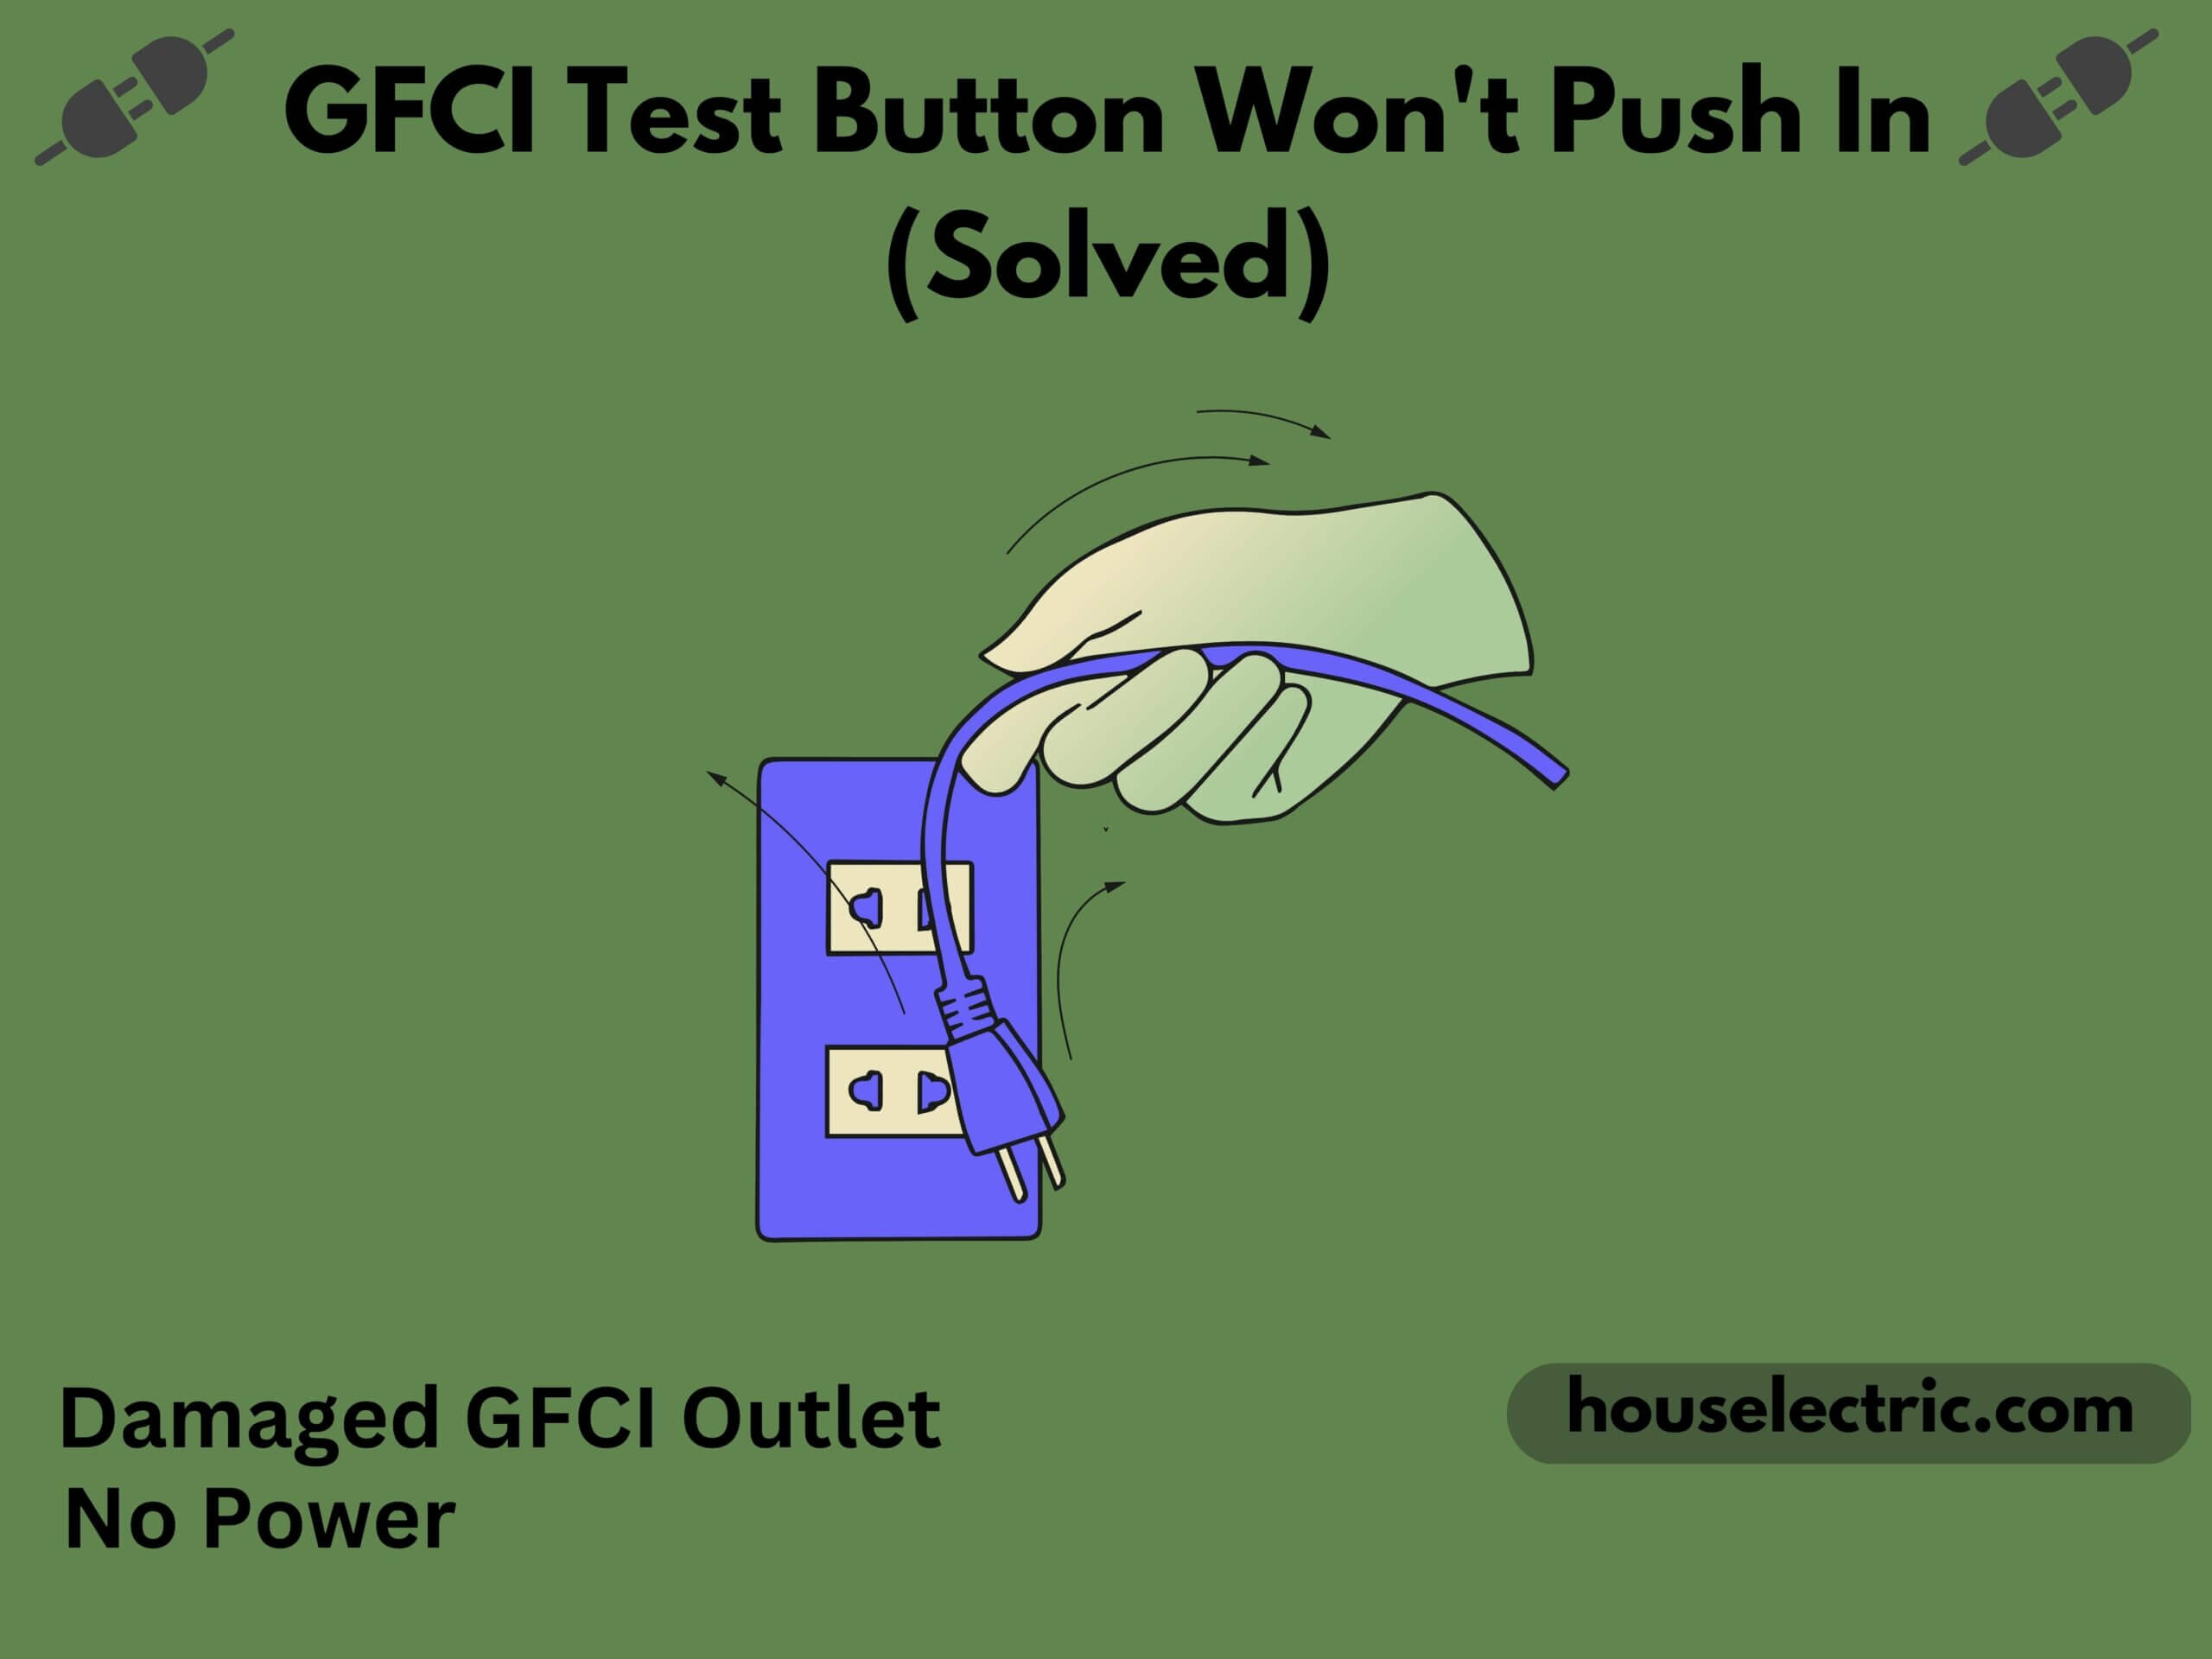 GFCI Test Button Won't Push In